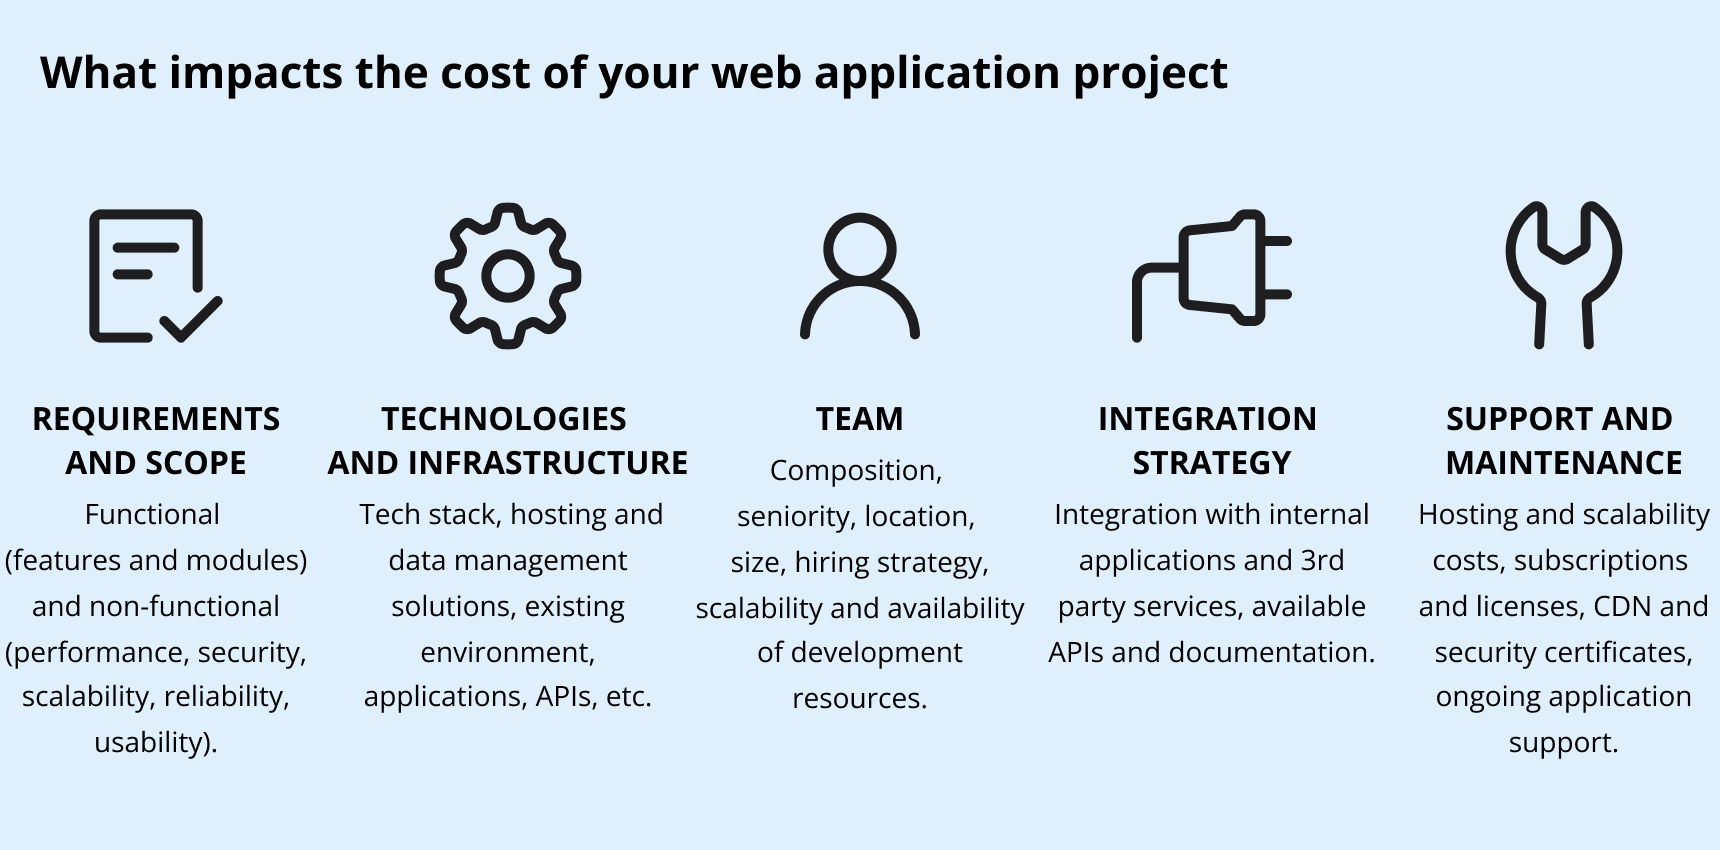 What impacts the cost of web app development